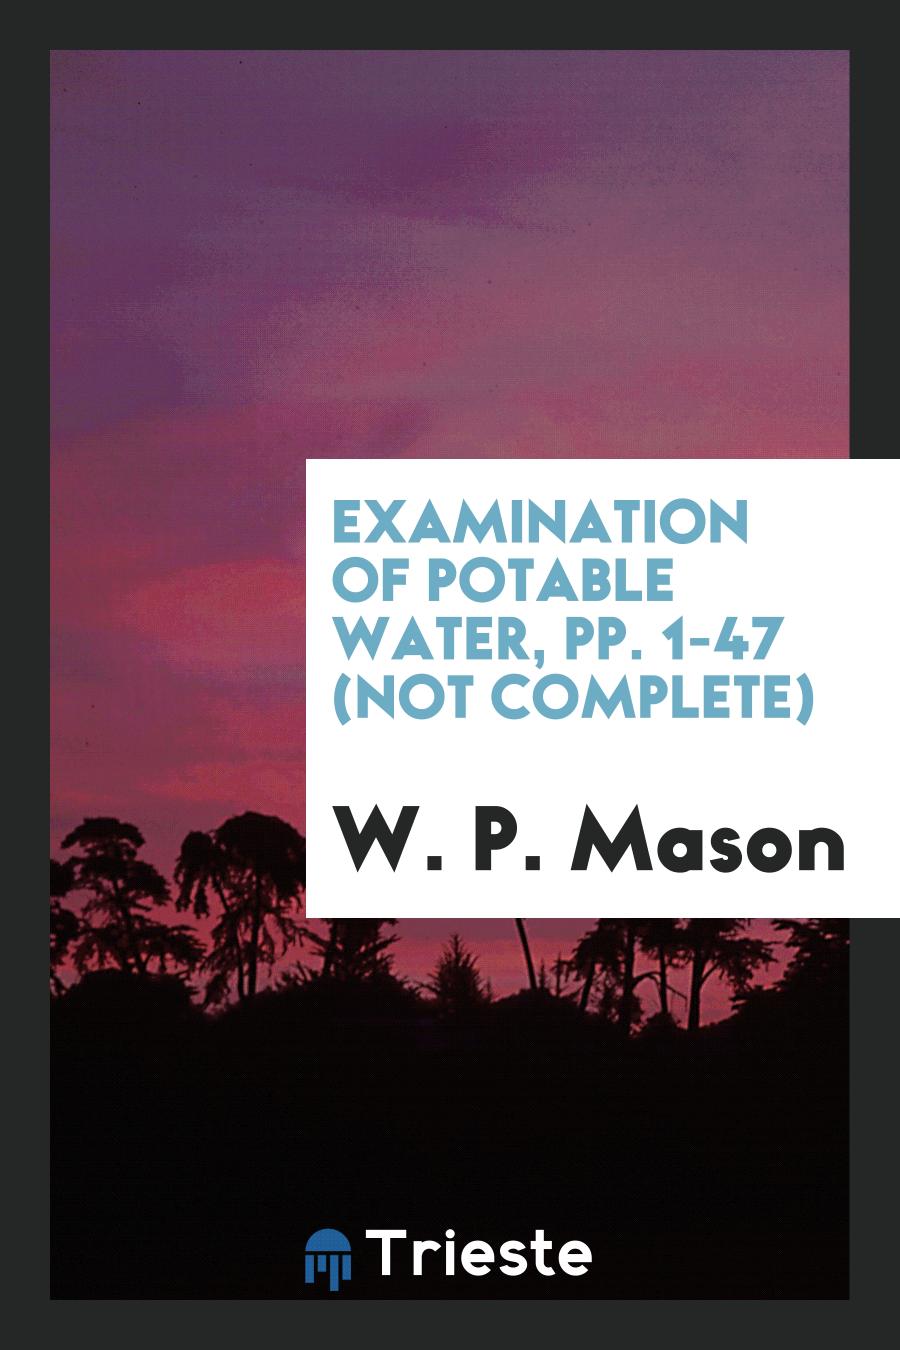 Examination of Potable Water, pp. 1-47 (not complete)